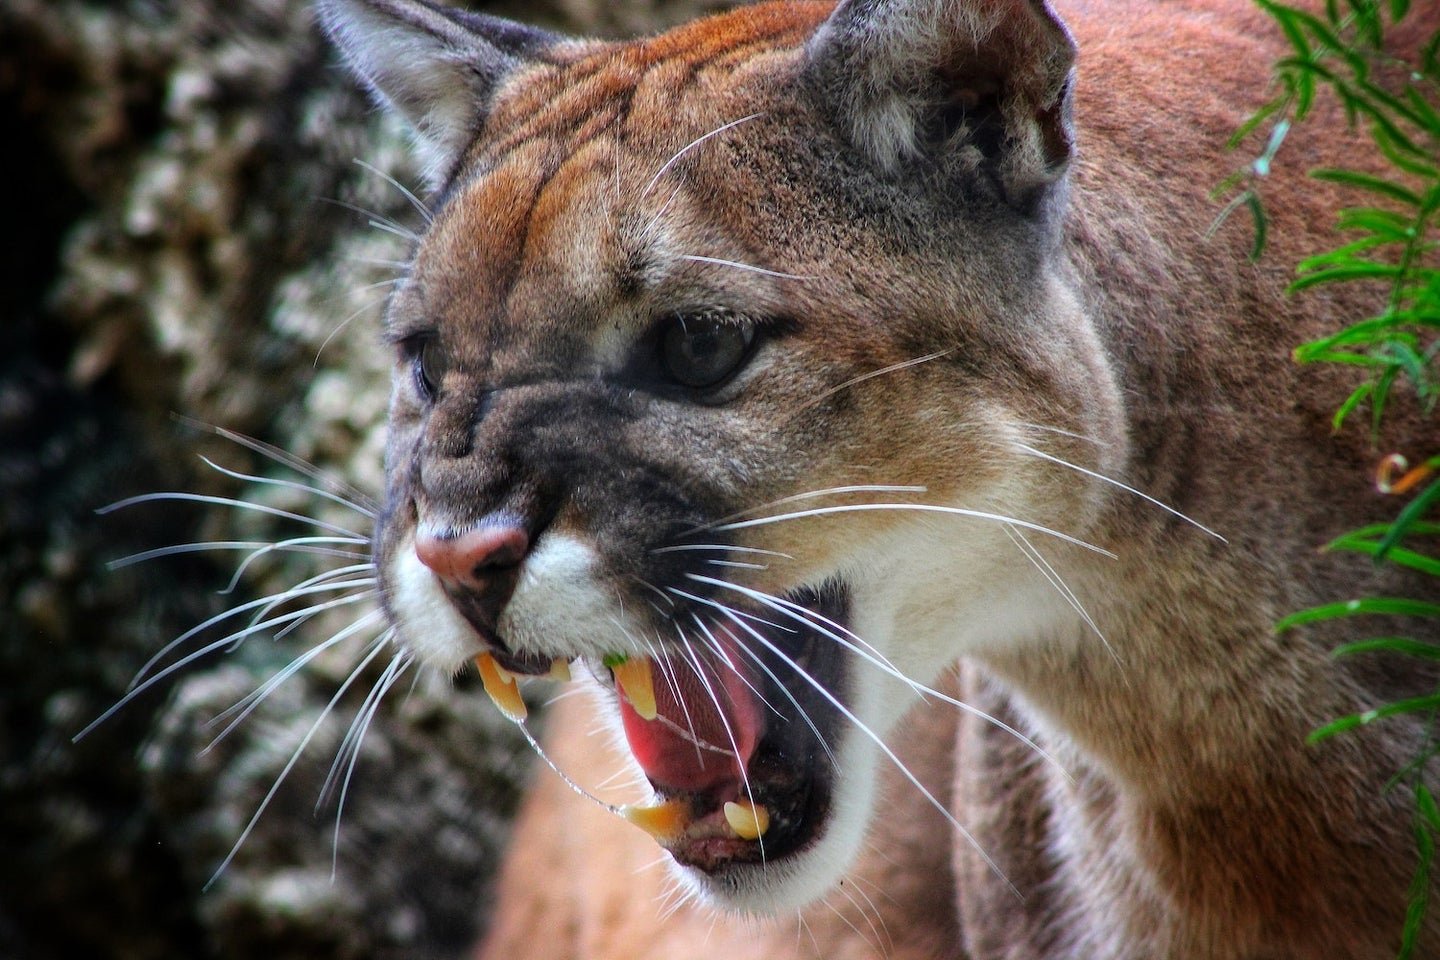 Dog Is Critically Injured After Fighting Mountain Lion to Save Its Owner